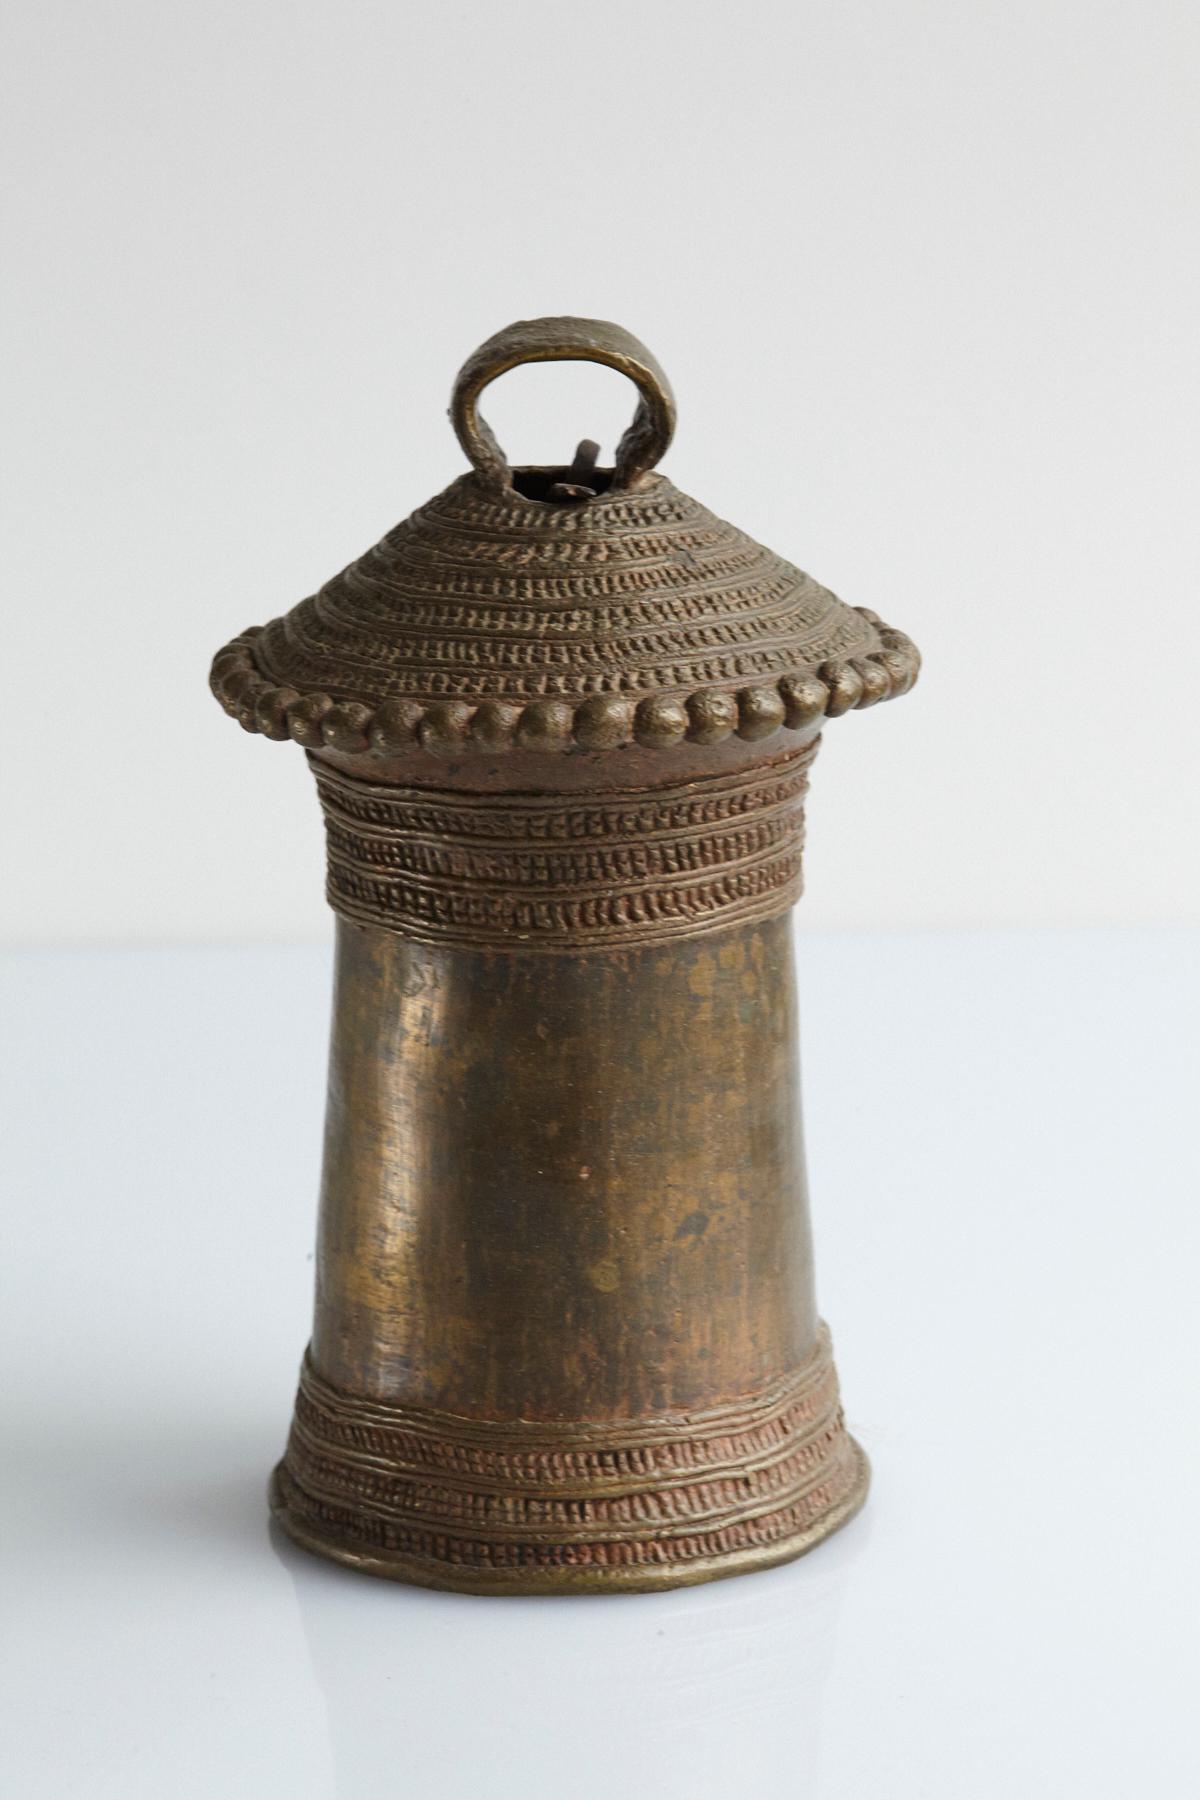 Heavy traditional Benin cast bronze bell with fine decorative bead ornaments on the shoulder and a nice deep and full sound. These bells were used to summon palace slaves. The bell has been created with a lost wax process.

The numbers are the